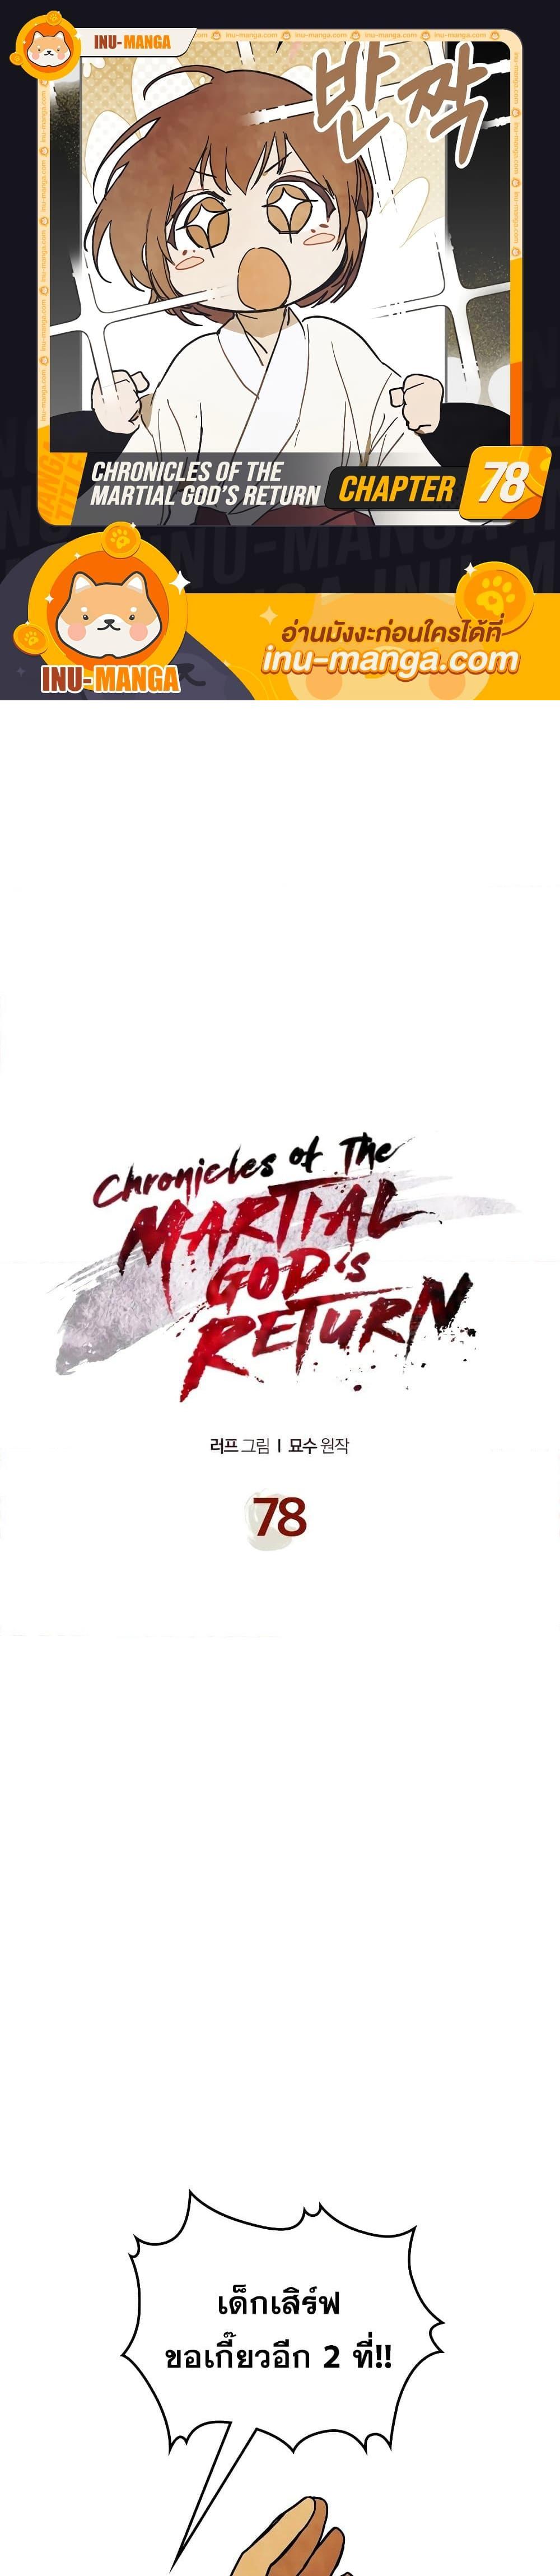 Chronicles Of The Martial God’s Return ตอนที่ 78 (1)